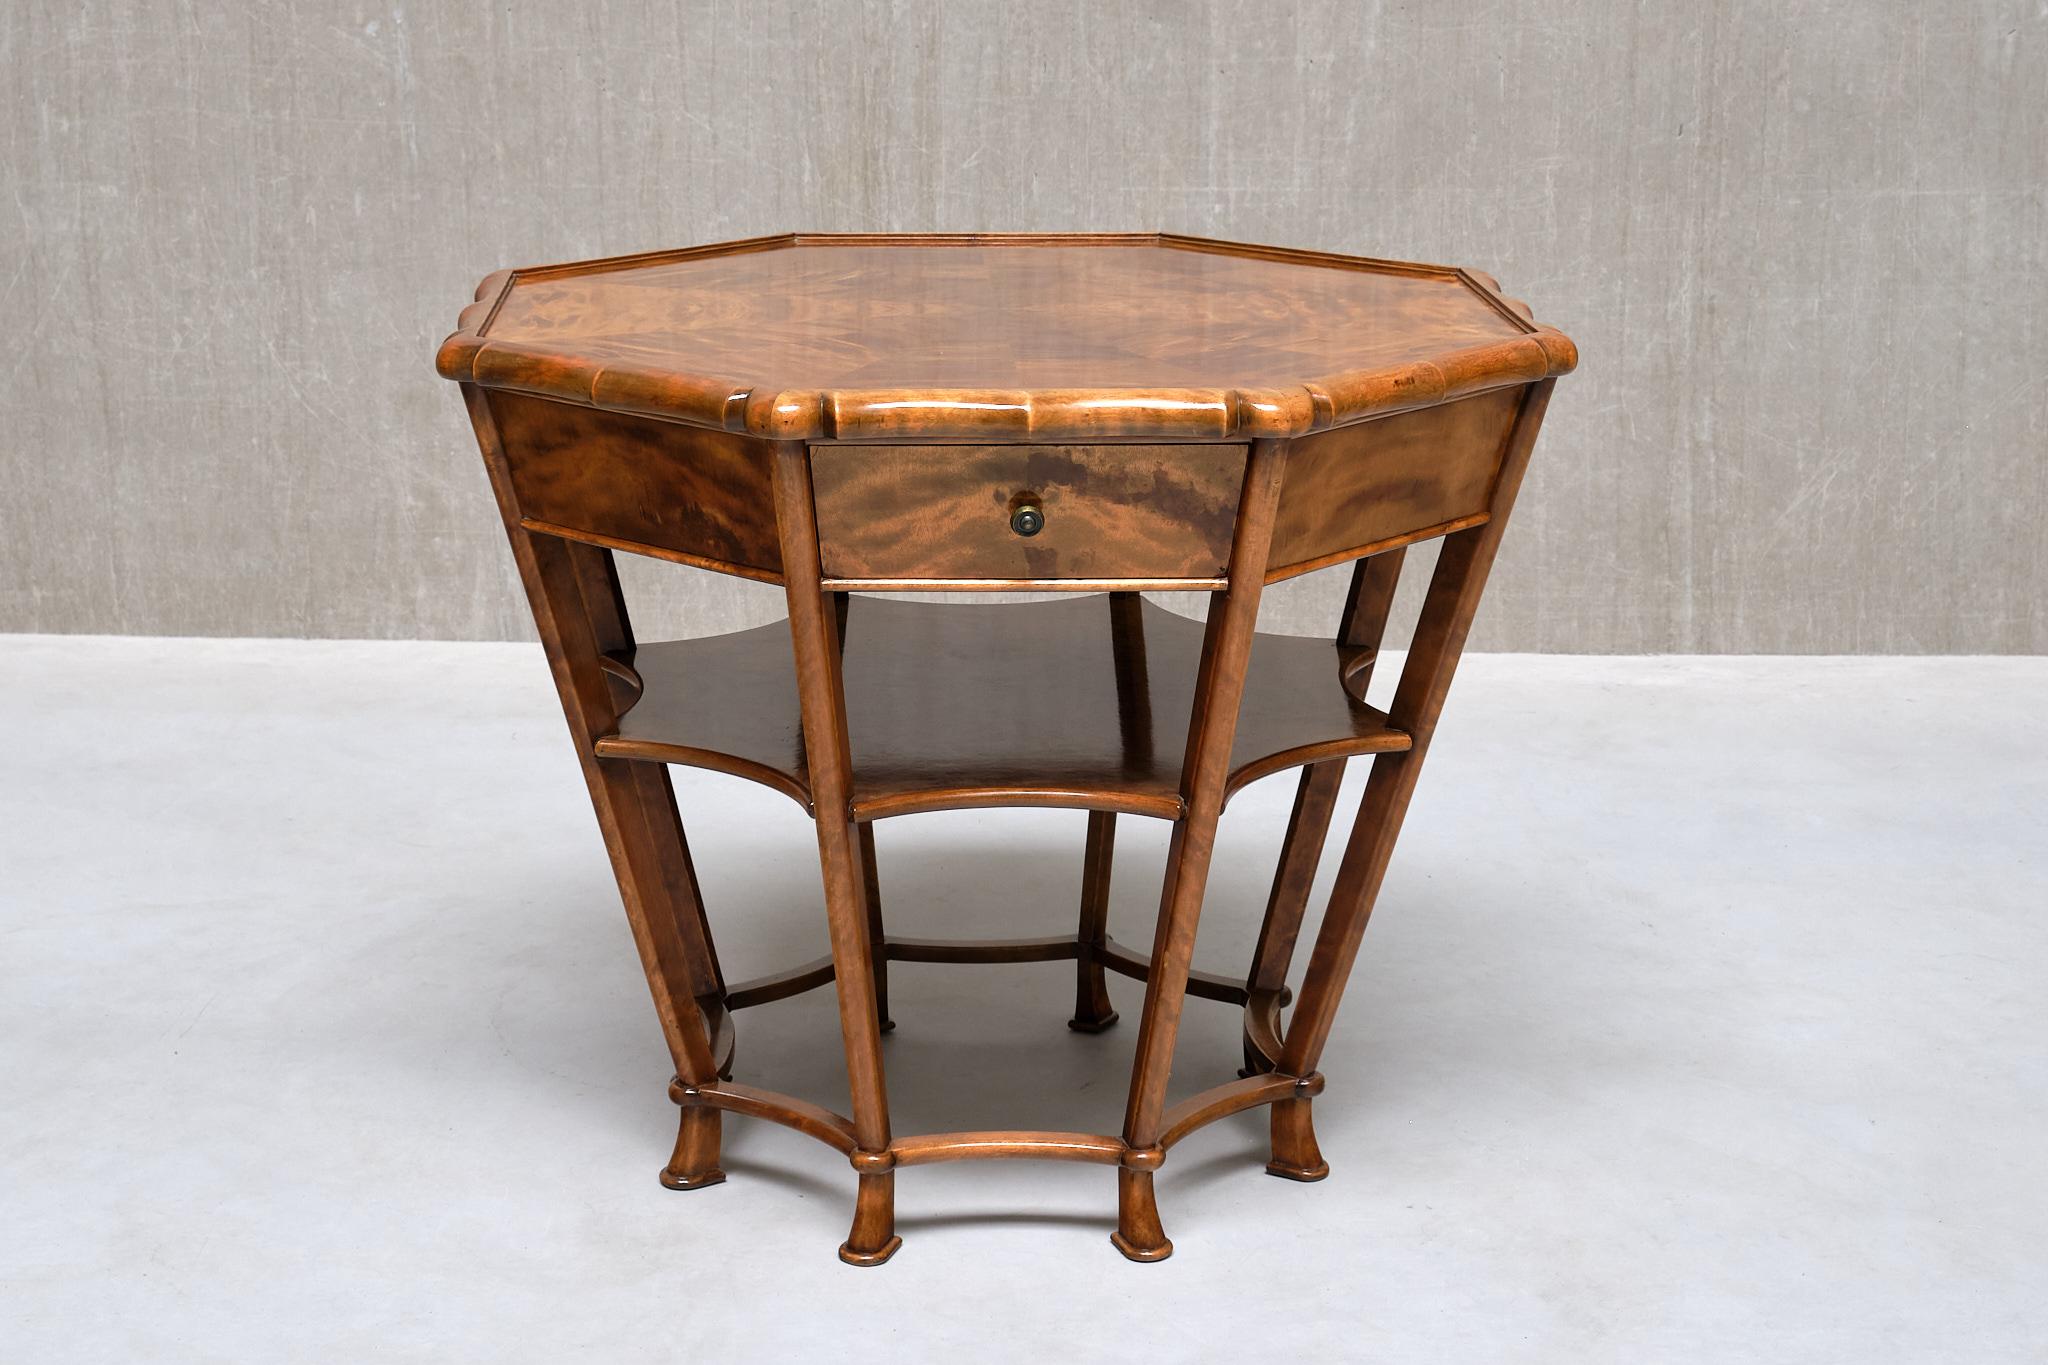 Exceptional Expressionist Octagonal Center Table in Flamed Birch, Germany, 1920s For Sale 9